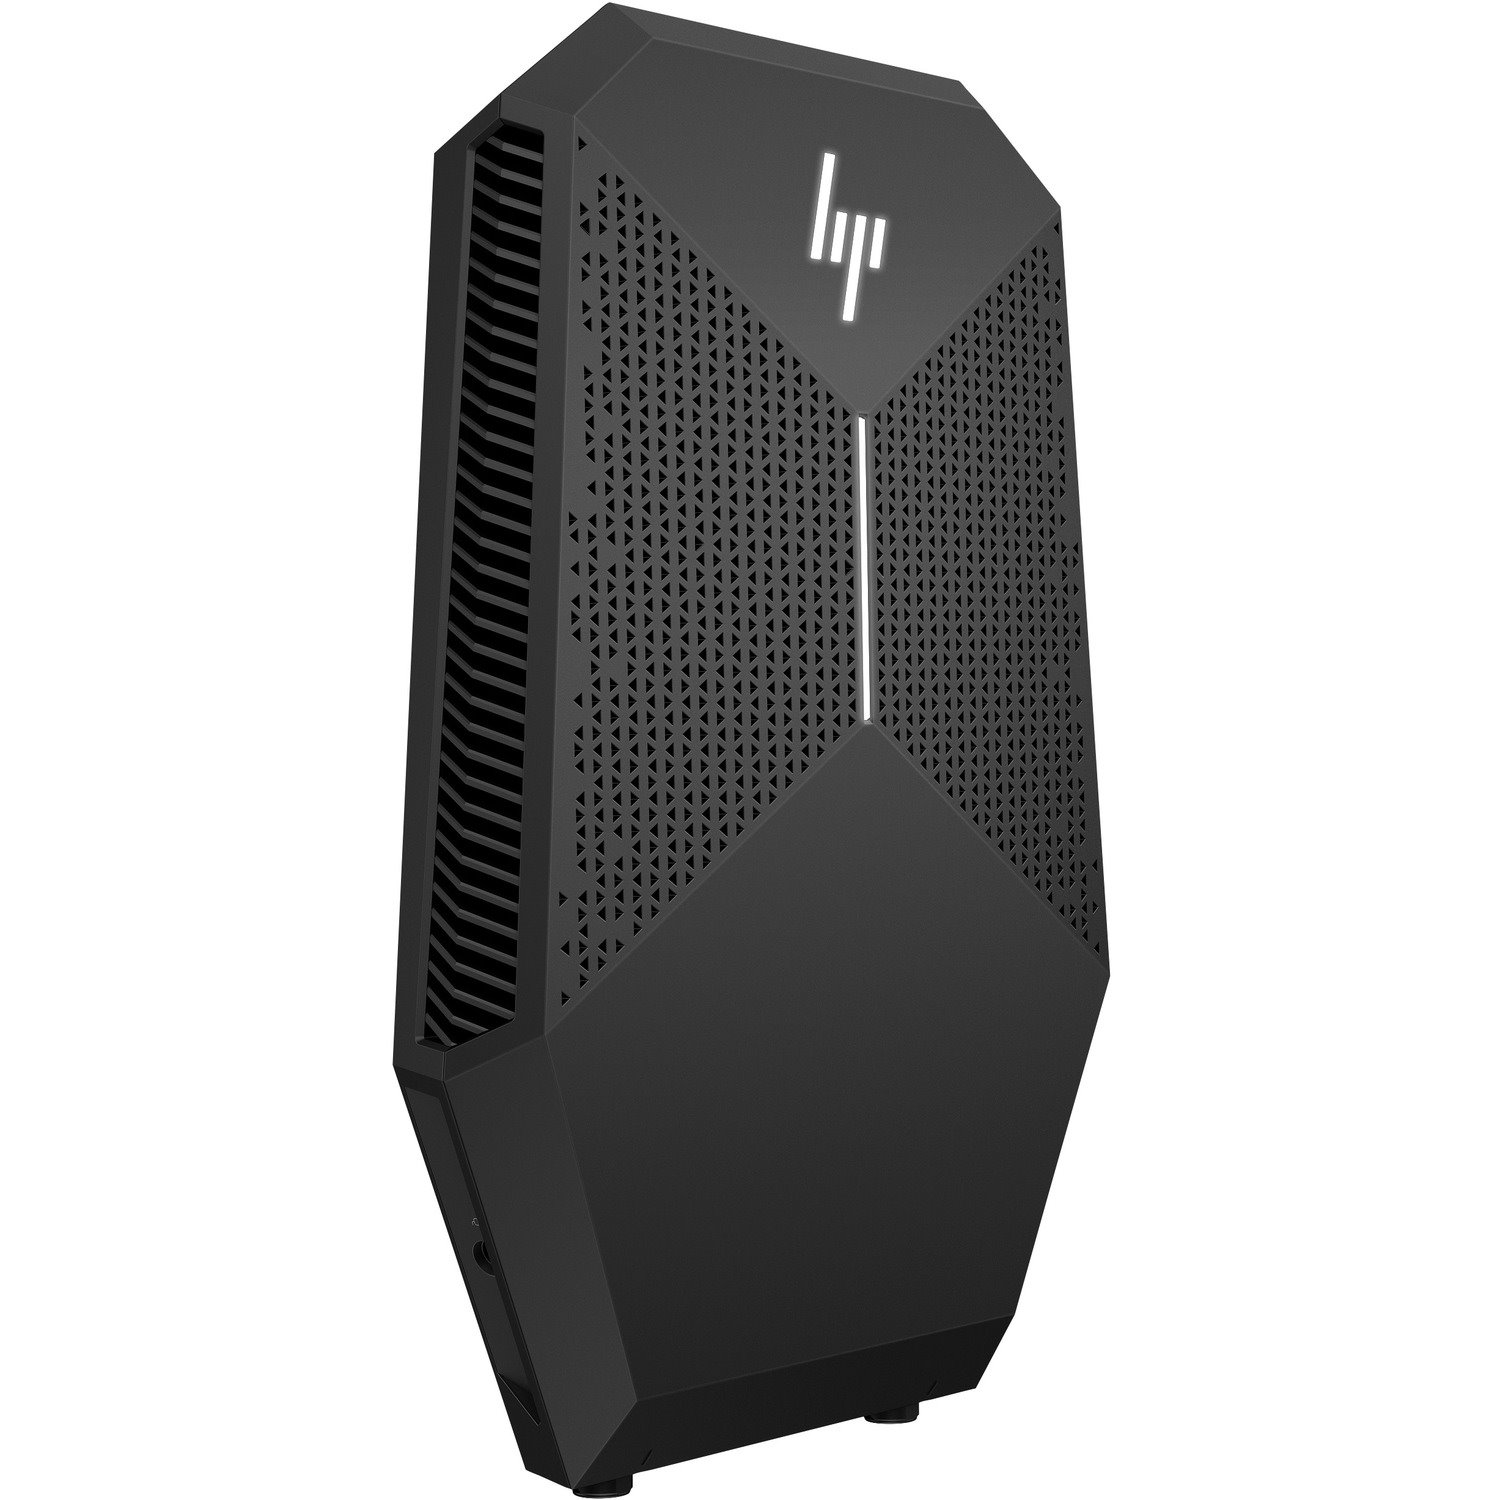 HP Z VR G2 Backpack Workstation - Intel Core i7 9th Gen i7-9850H - 16 GB - 256 GB SSD - Small Form Factor - Black